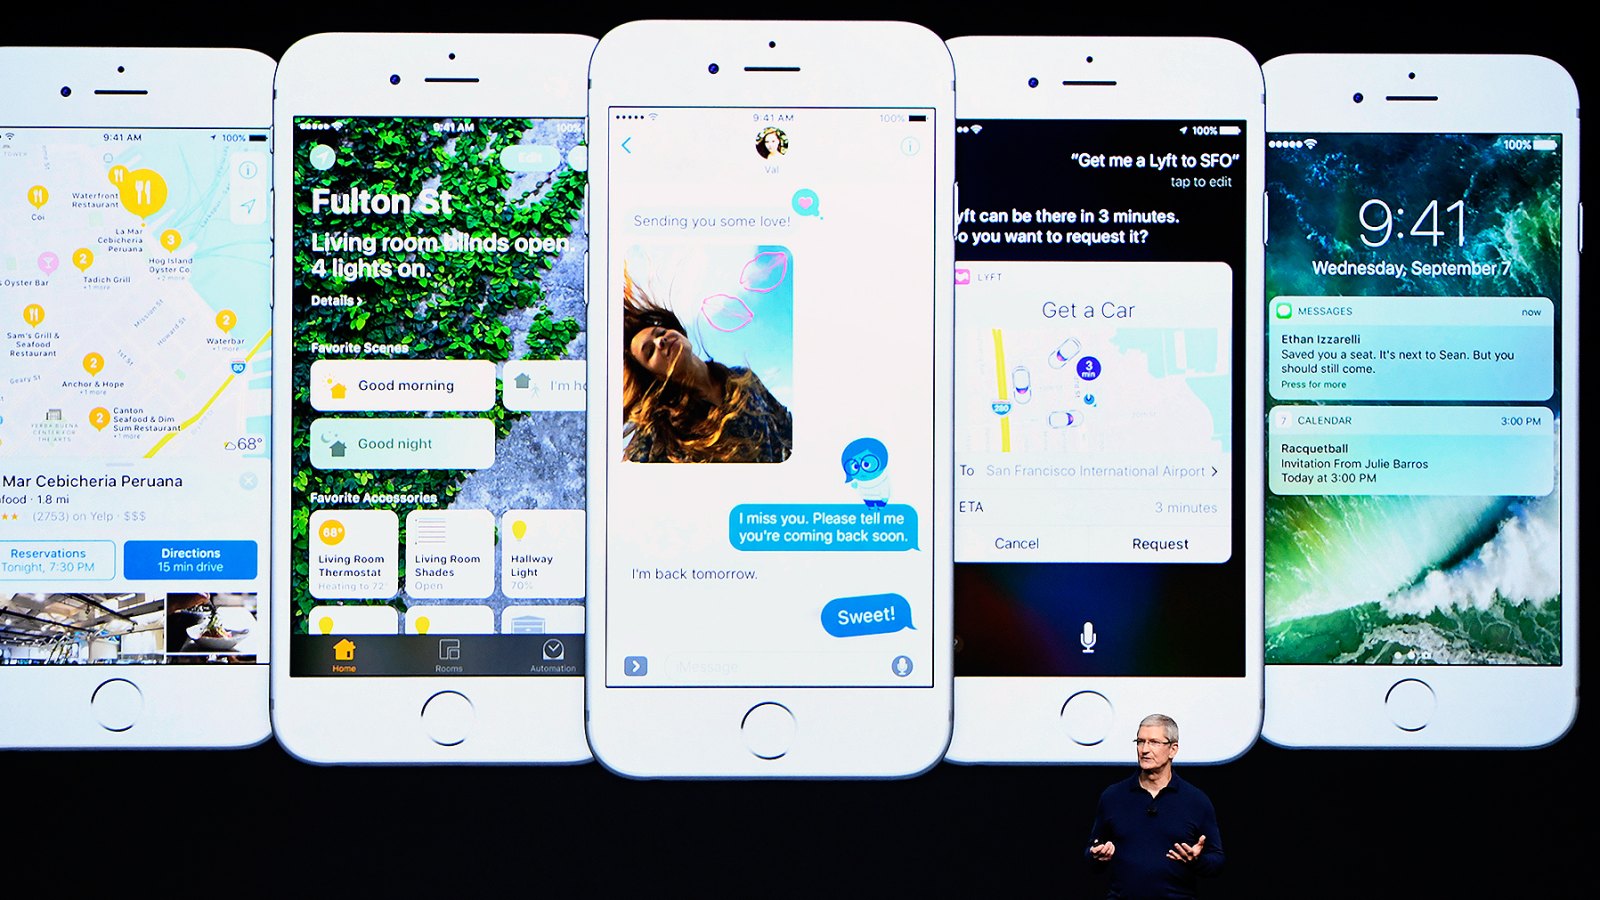 Tim Cook, chief executive officer of Apple Inc., speaks during an event in San Francisco, California, U.S., on Wednesday, Sept. 7, 2016.